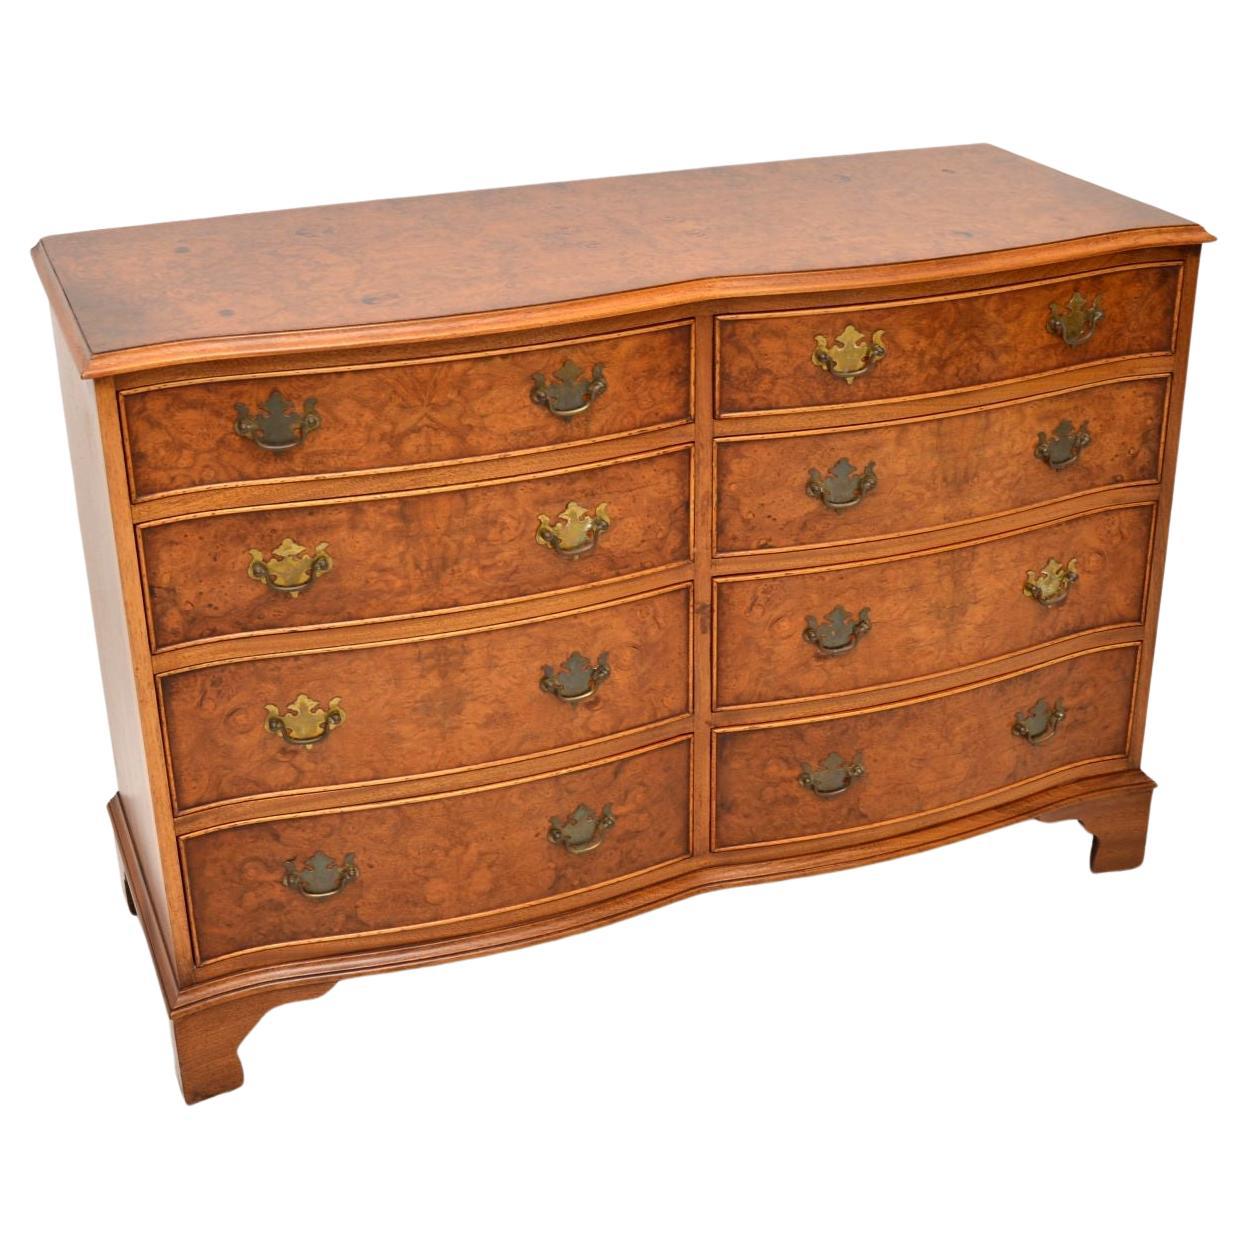 Antique Georgian Style Burr Walnut Chest of Drawers / Sideboard